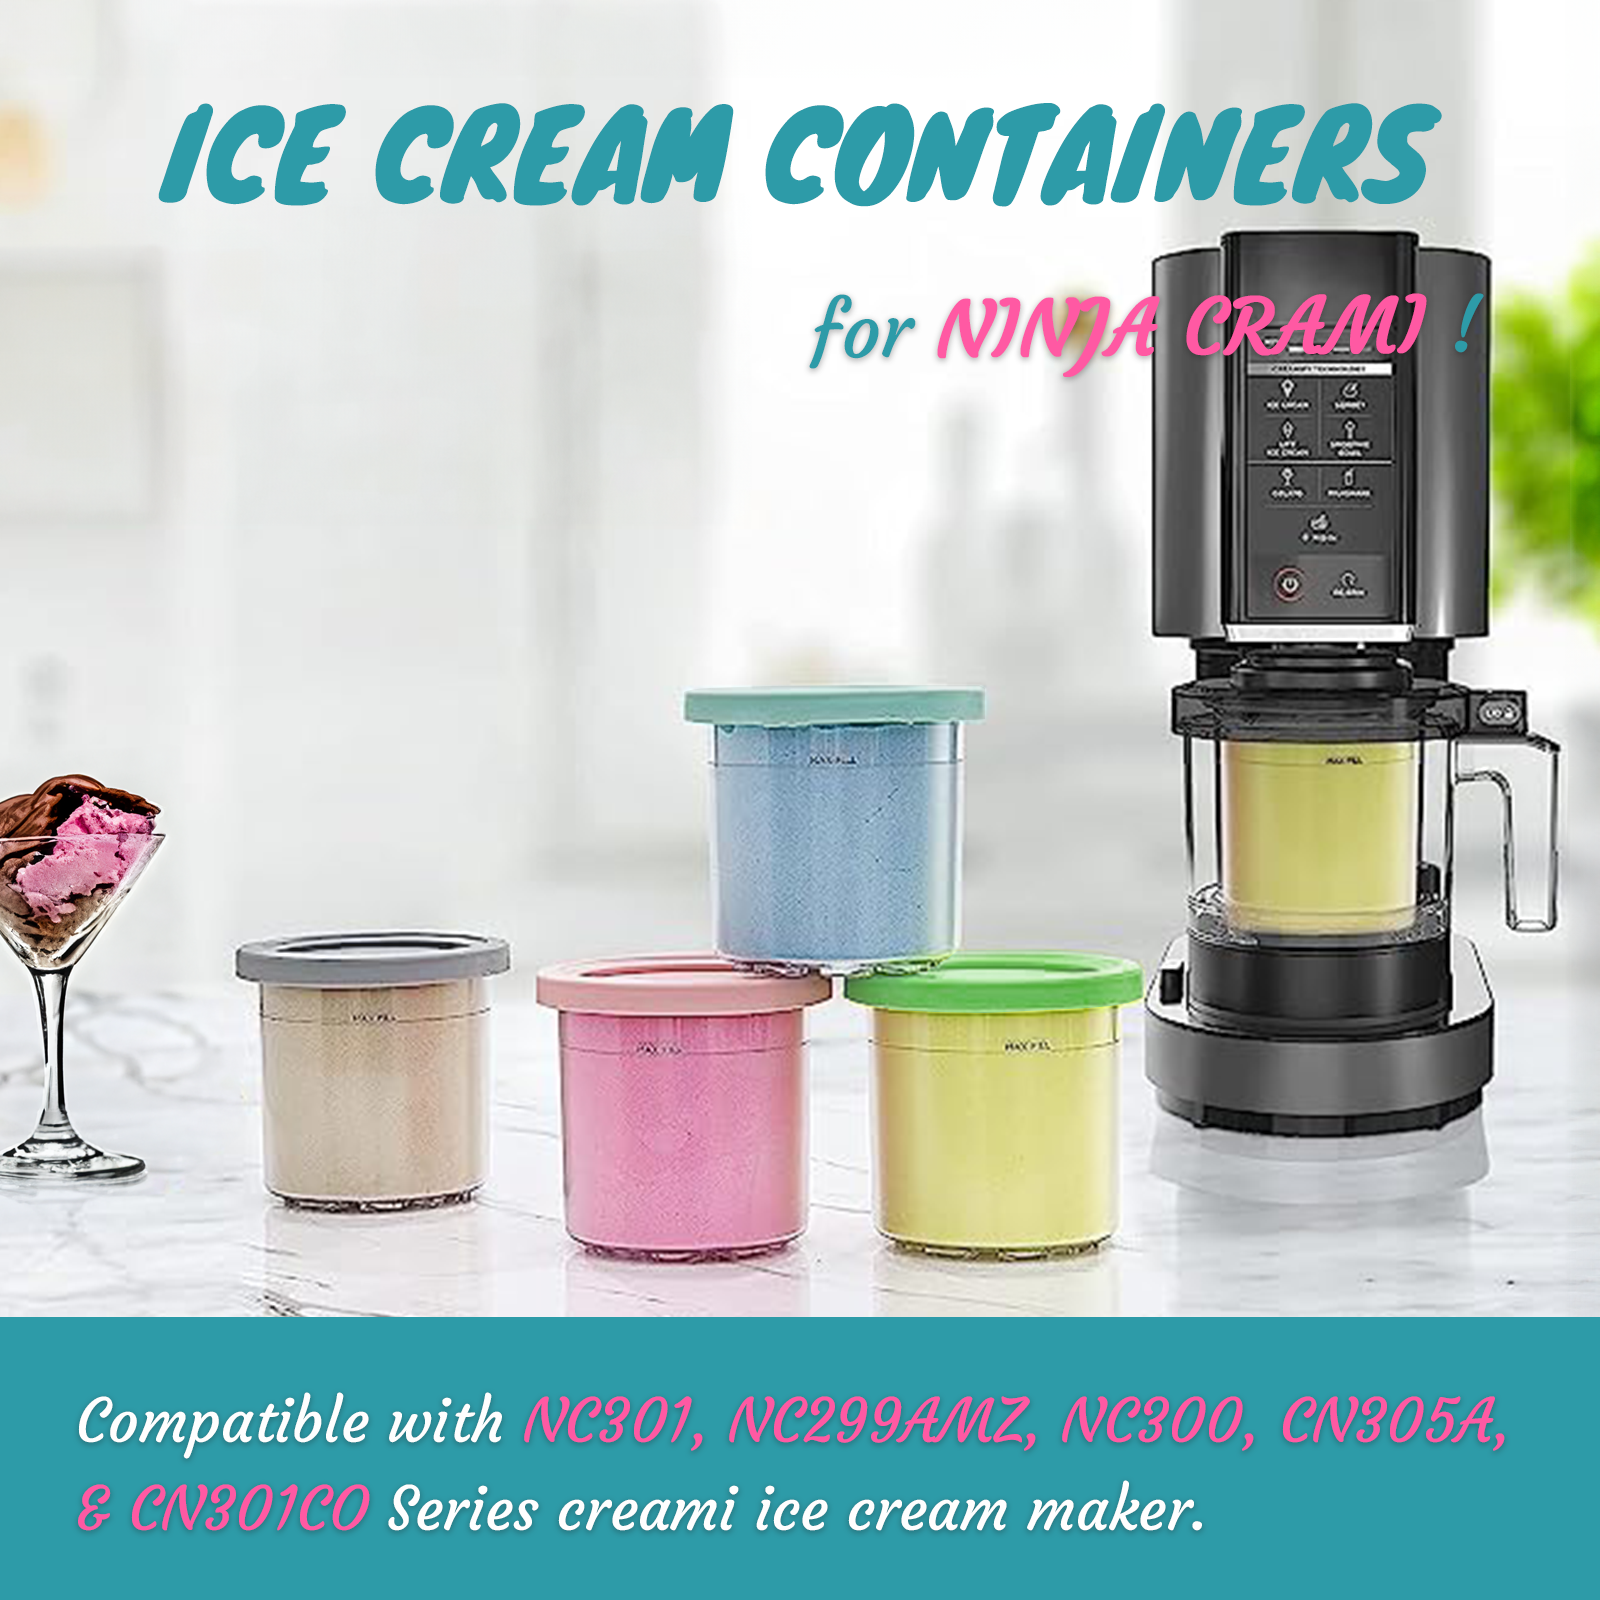 Reusable ice cream containers for homemade ice cream in the